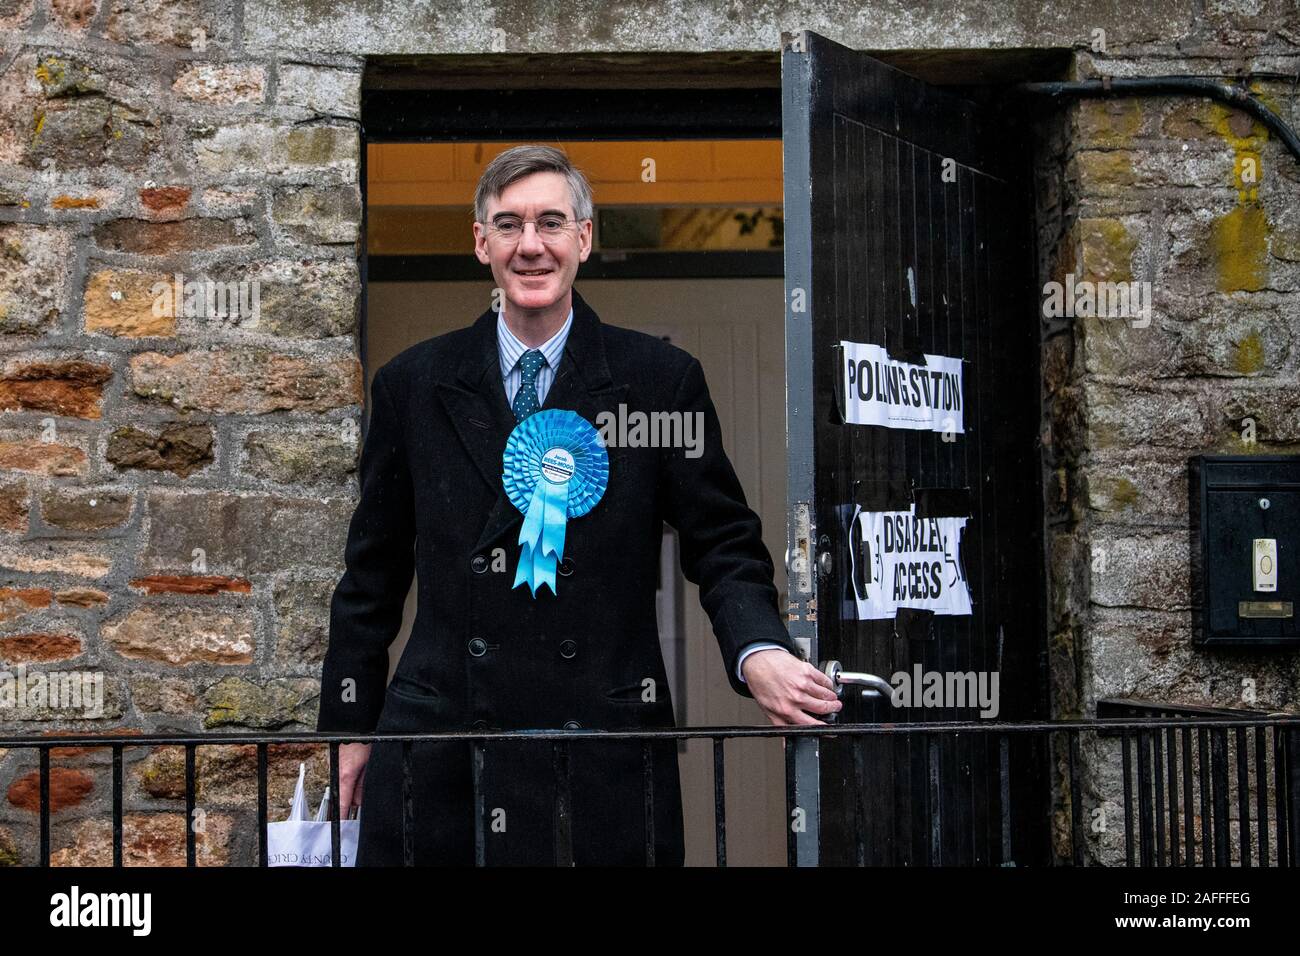 Conservative party candidate for North East Somerset Jacob Rees-Mogg casts his vote for the General Election at his local Polling Station. Stock Photo